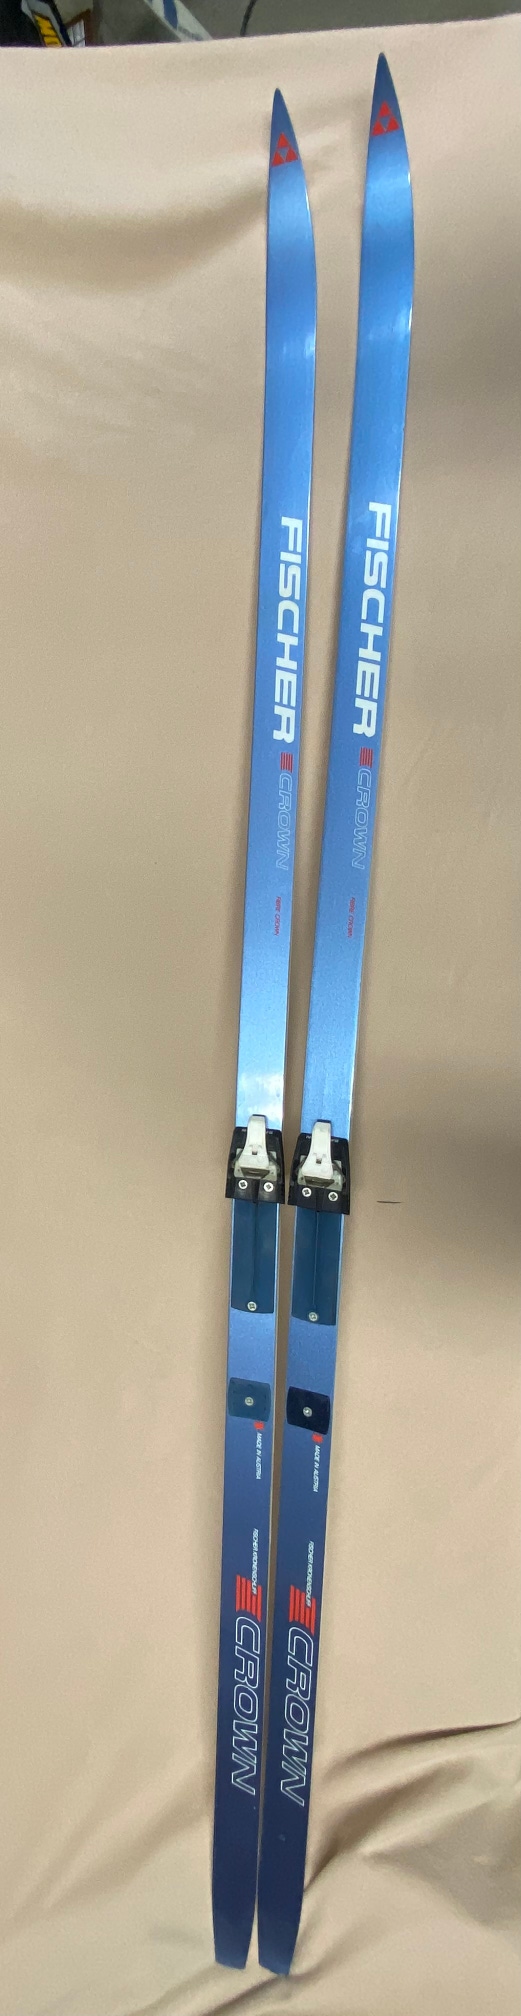 Used Men's Fischer Crown Cross Country Skis With Bindings